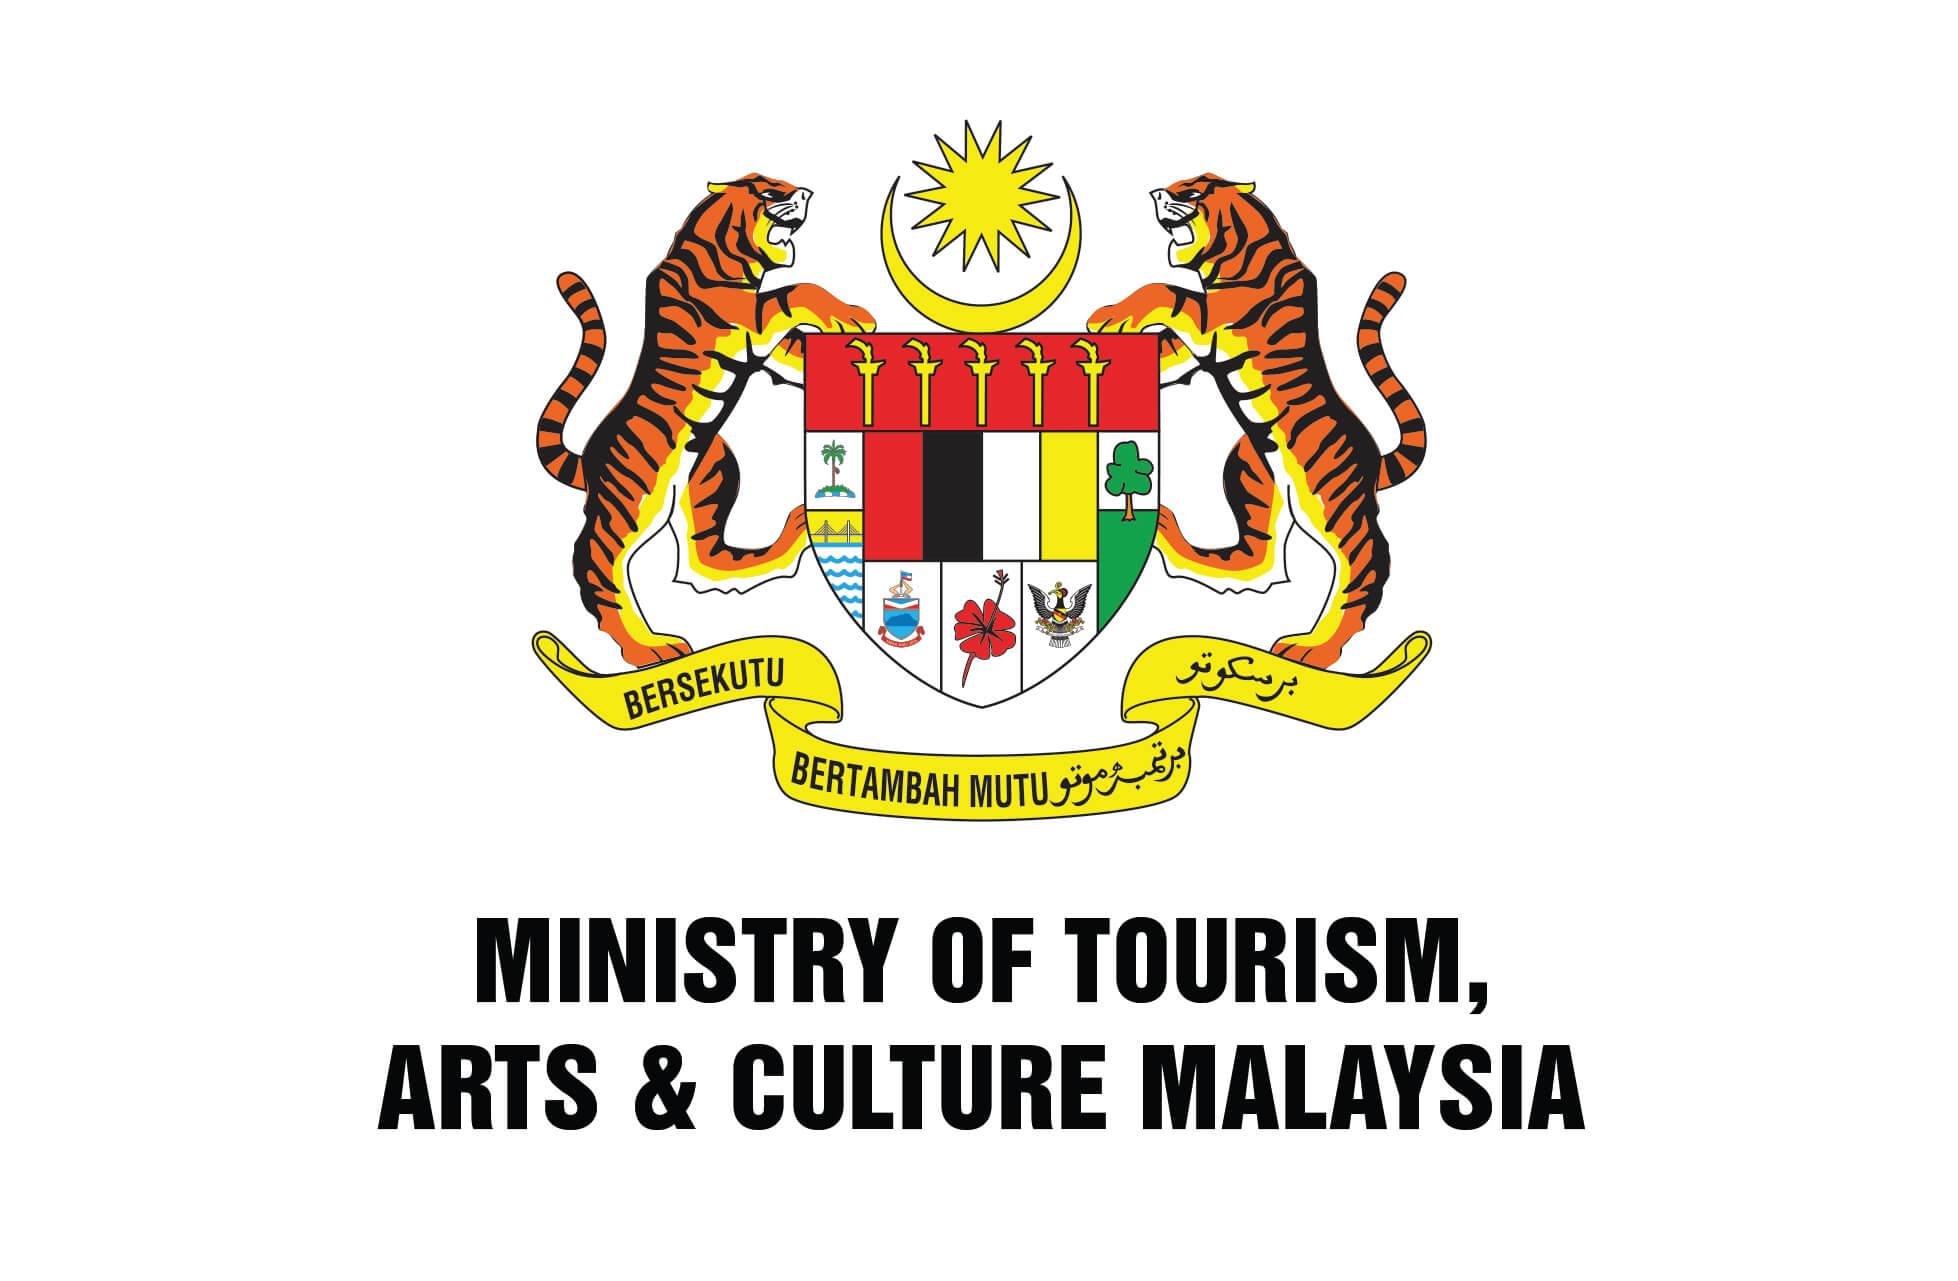 Ministry of Tourism, Arts & Culture Malaysia